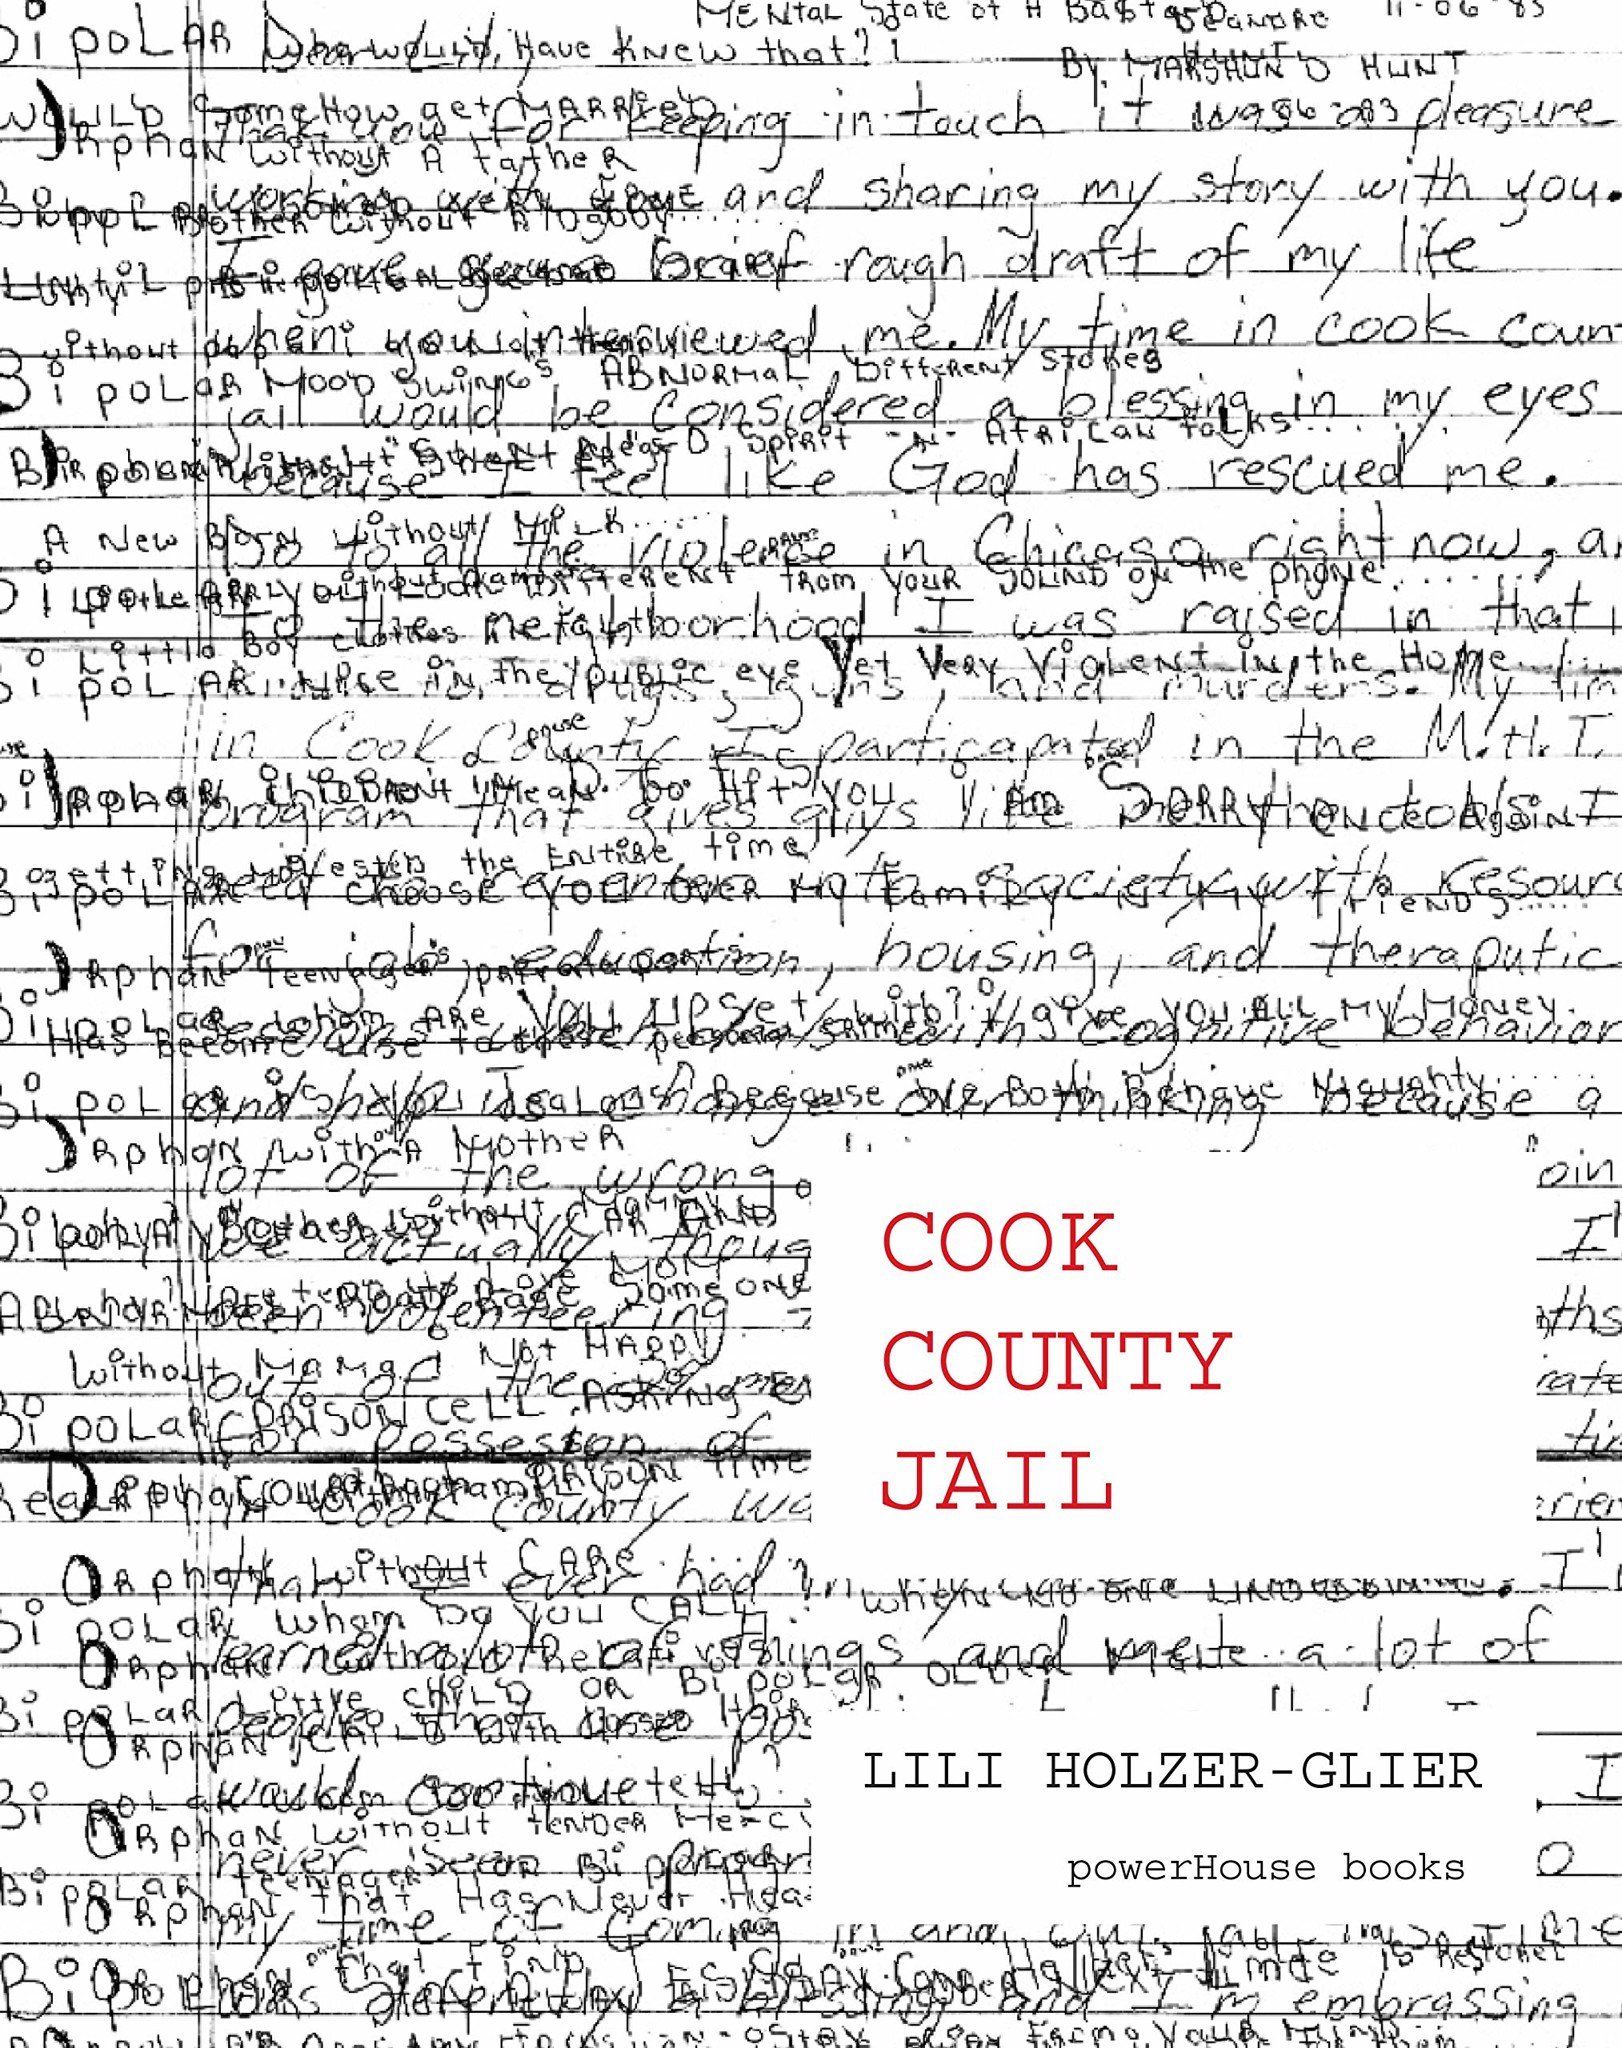  I Refuse For The Devil To Take My Soul : Inside Cook County Jail_Holzer-Glier Lilli_9781576878880_powerHouse Books,U.S. 